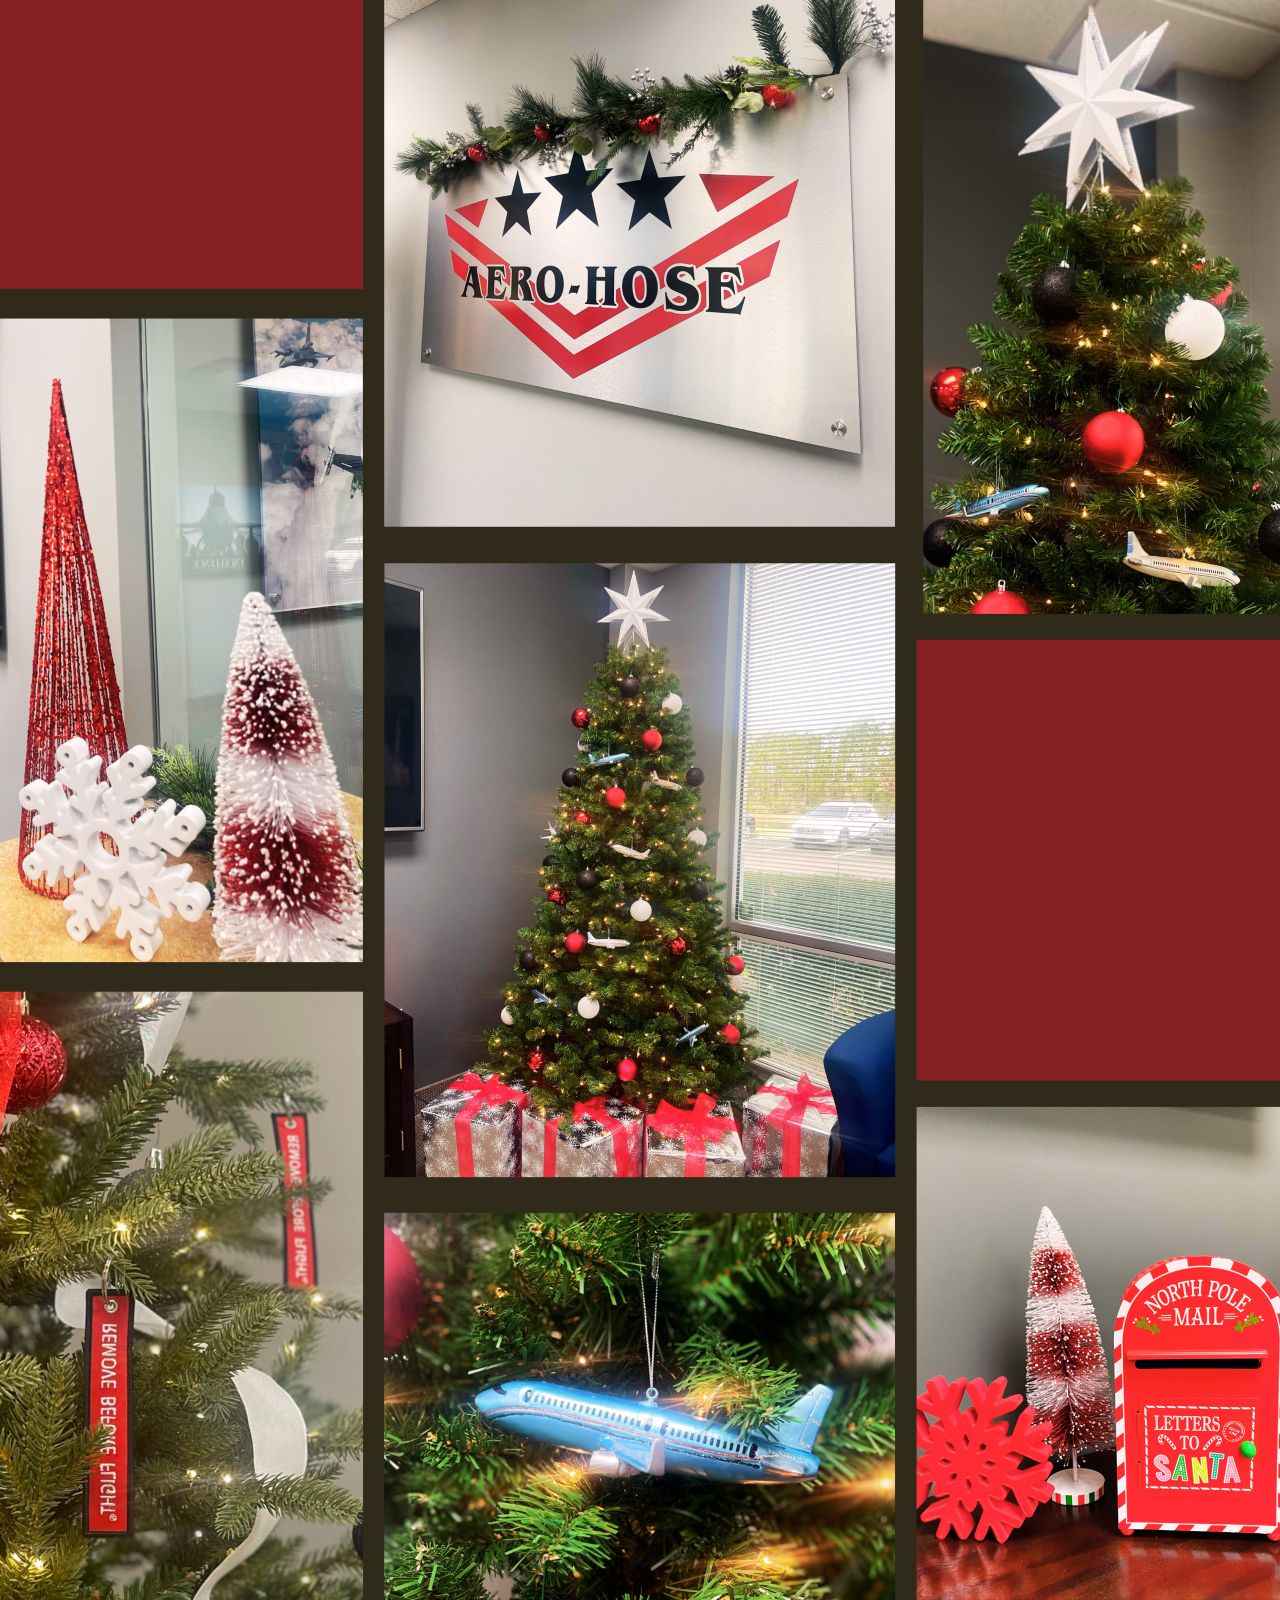 collage of festive office decorations including a decorated christmas tree, various ornamental displays, and an auto draft sign adorned with holiday decor.